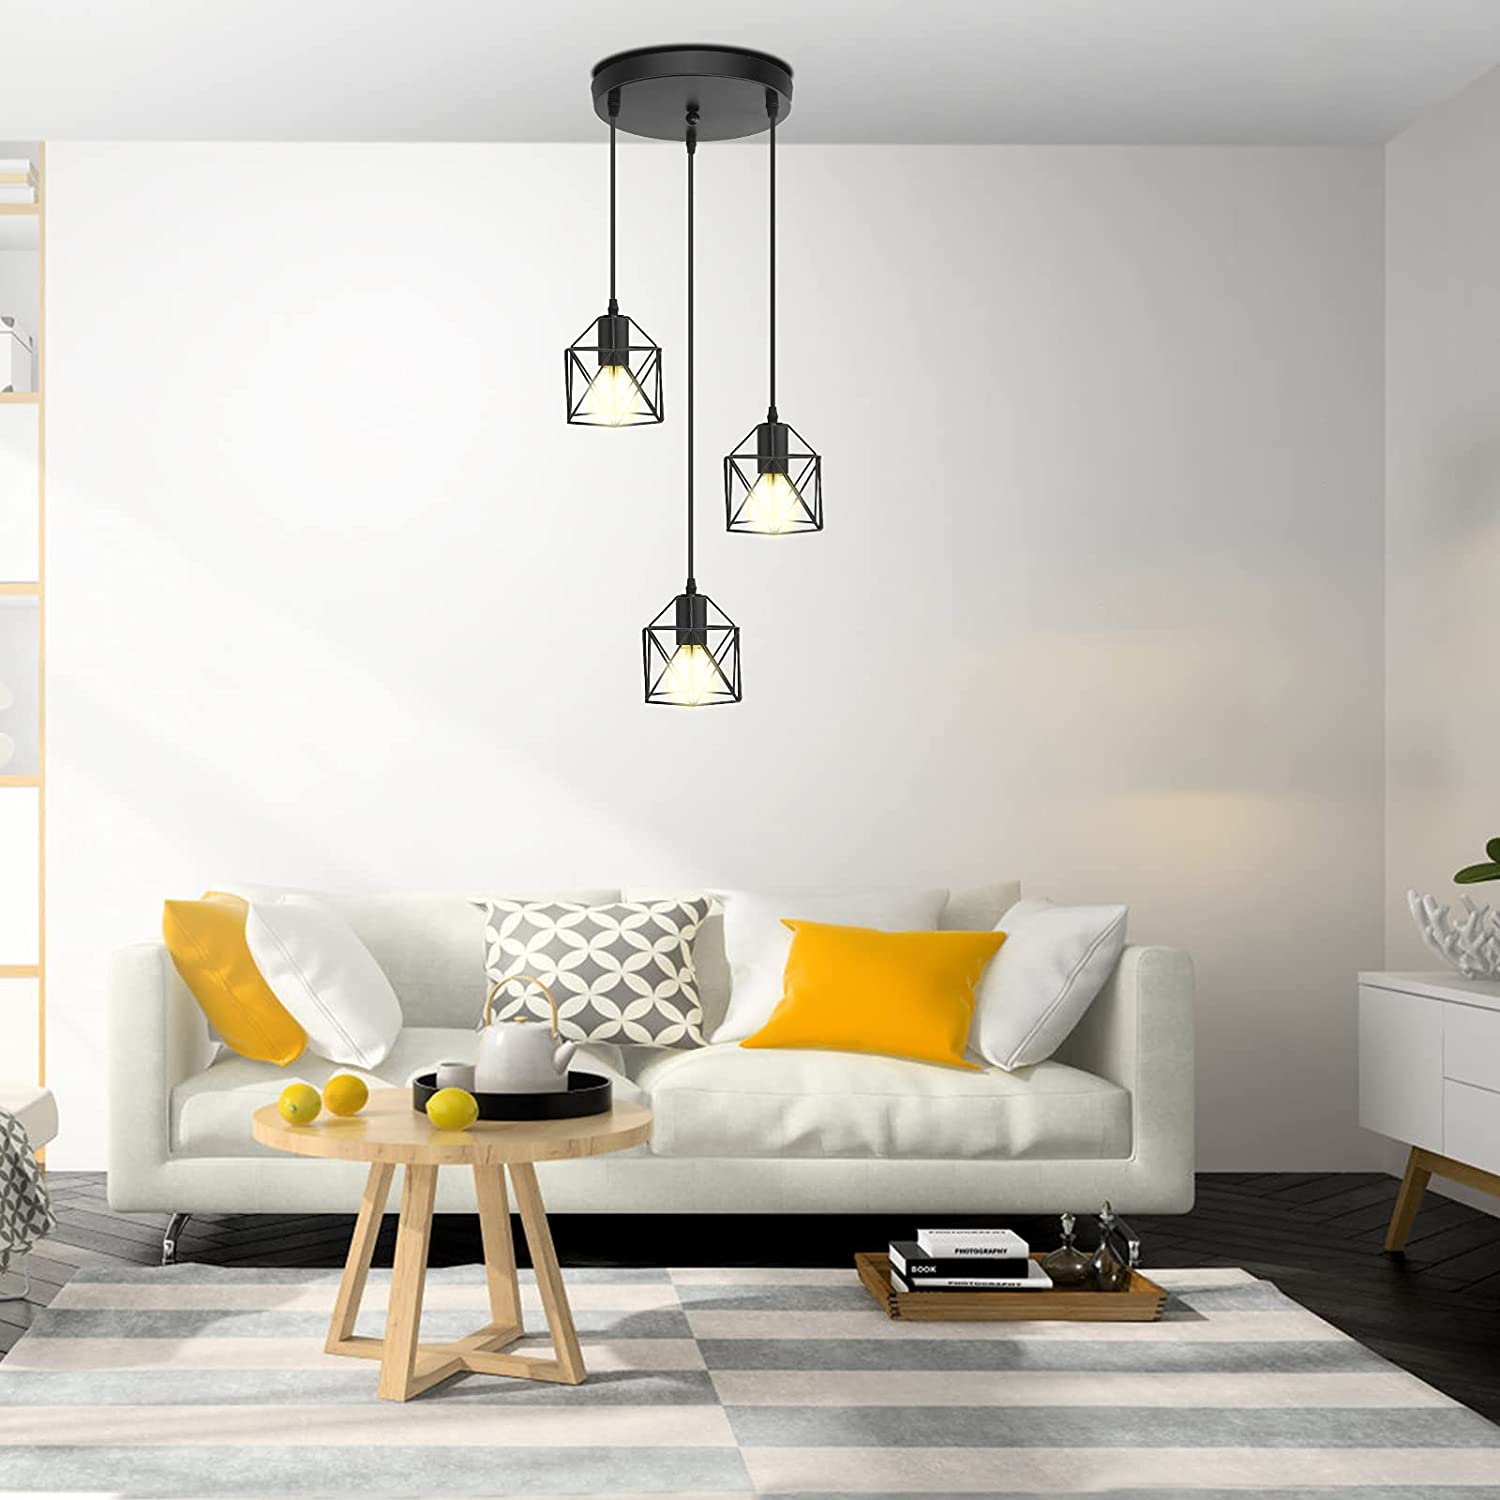 Buy Lyse Decor Bedroom Hanging Lights, Ceiling Lamps for Living Room, Hanging  Lights for Restaurants, Jhoomar and Dining Lights Online at Low Prices in  India - Amazon.in